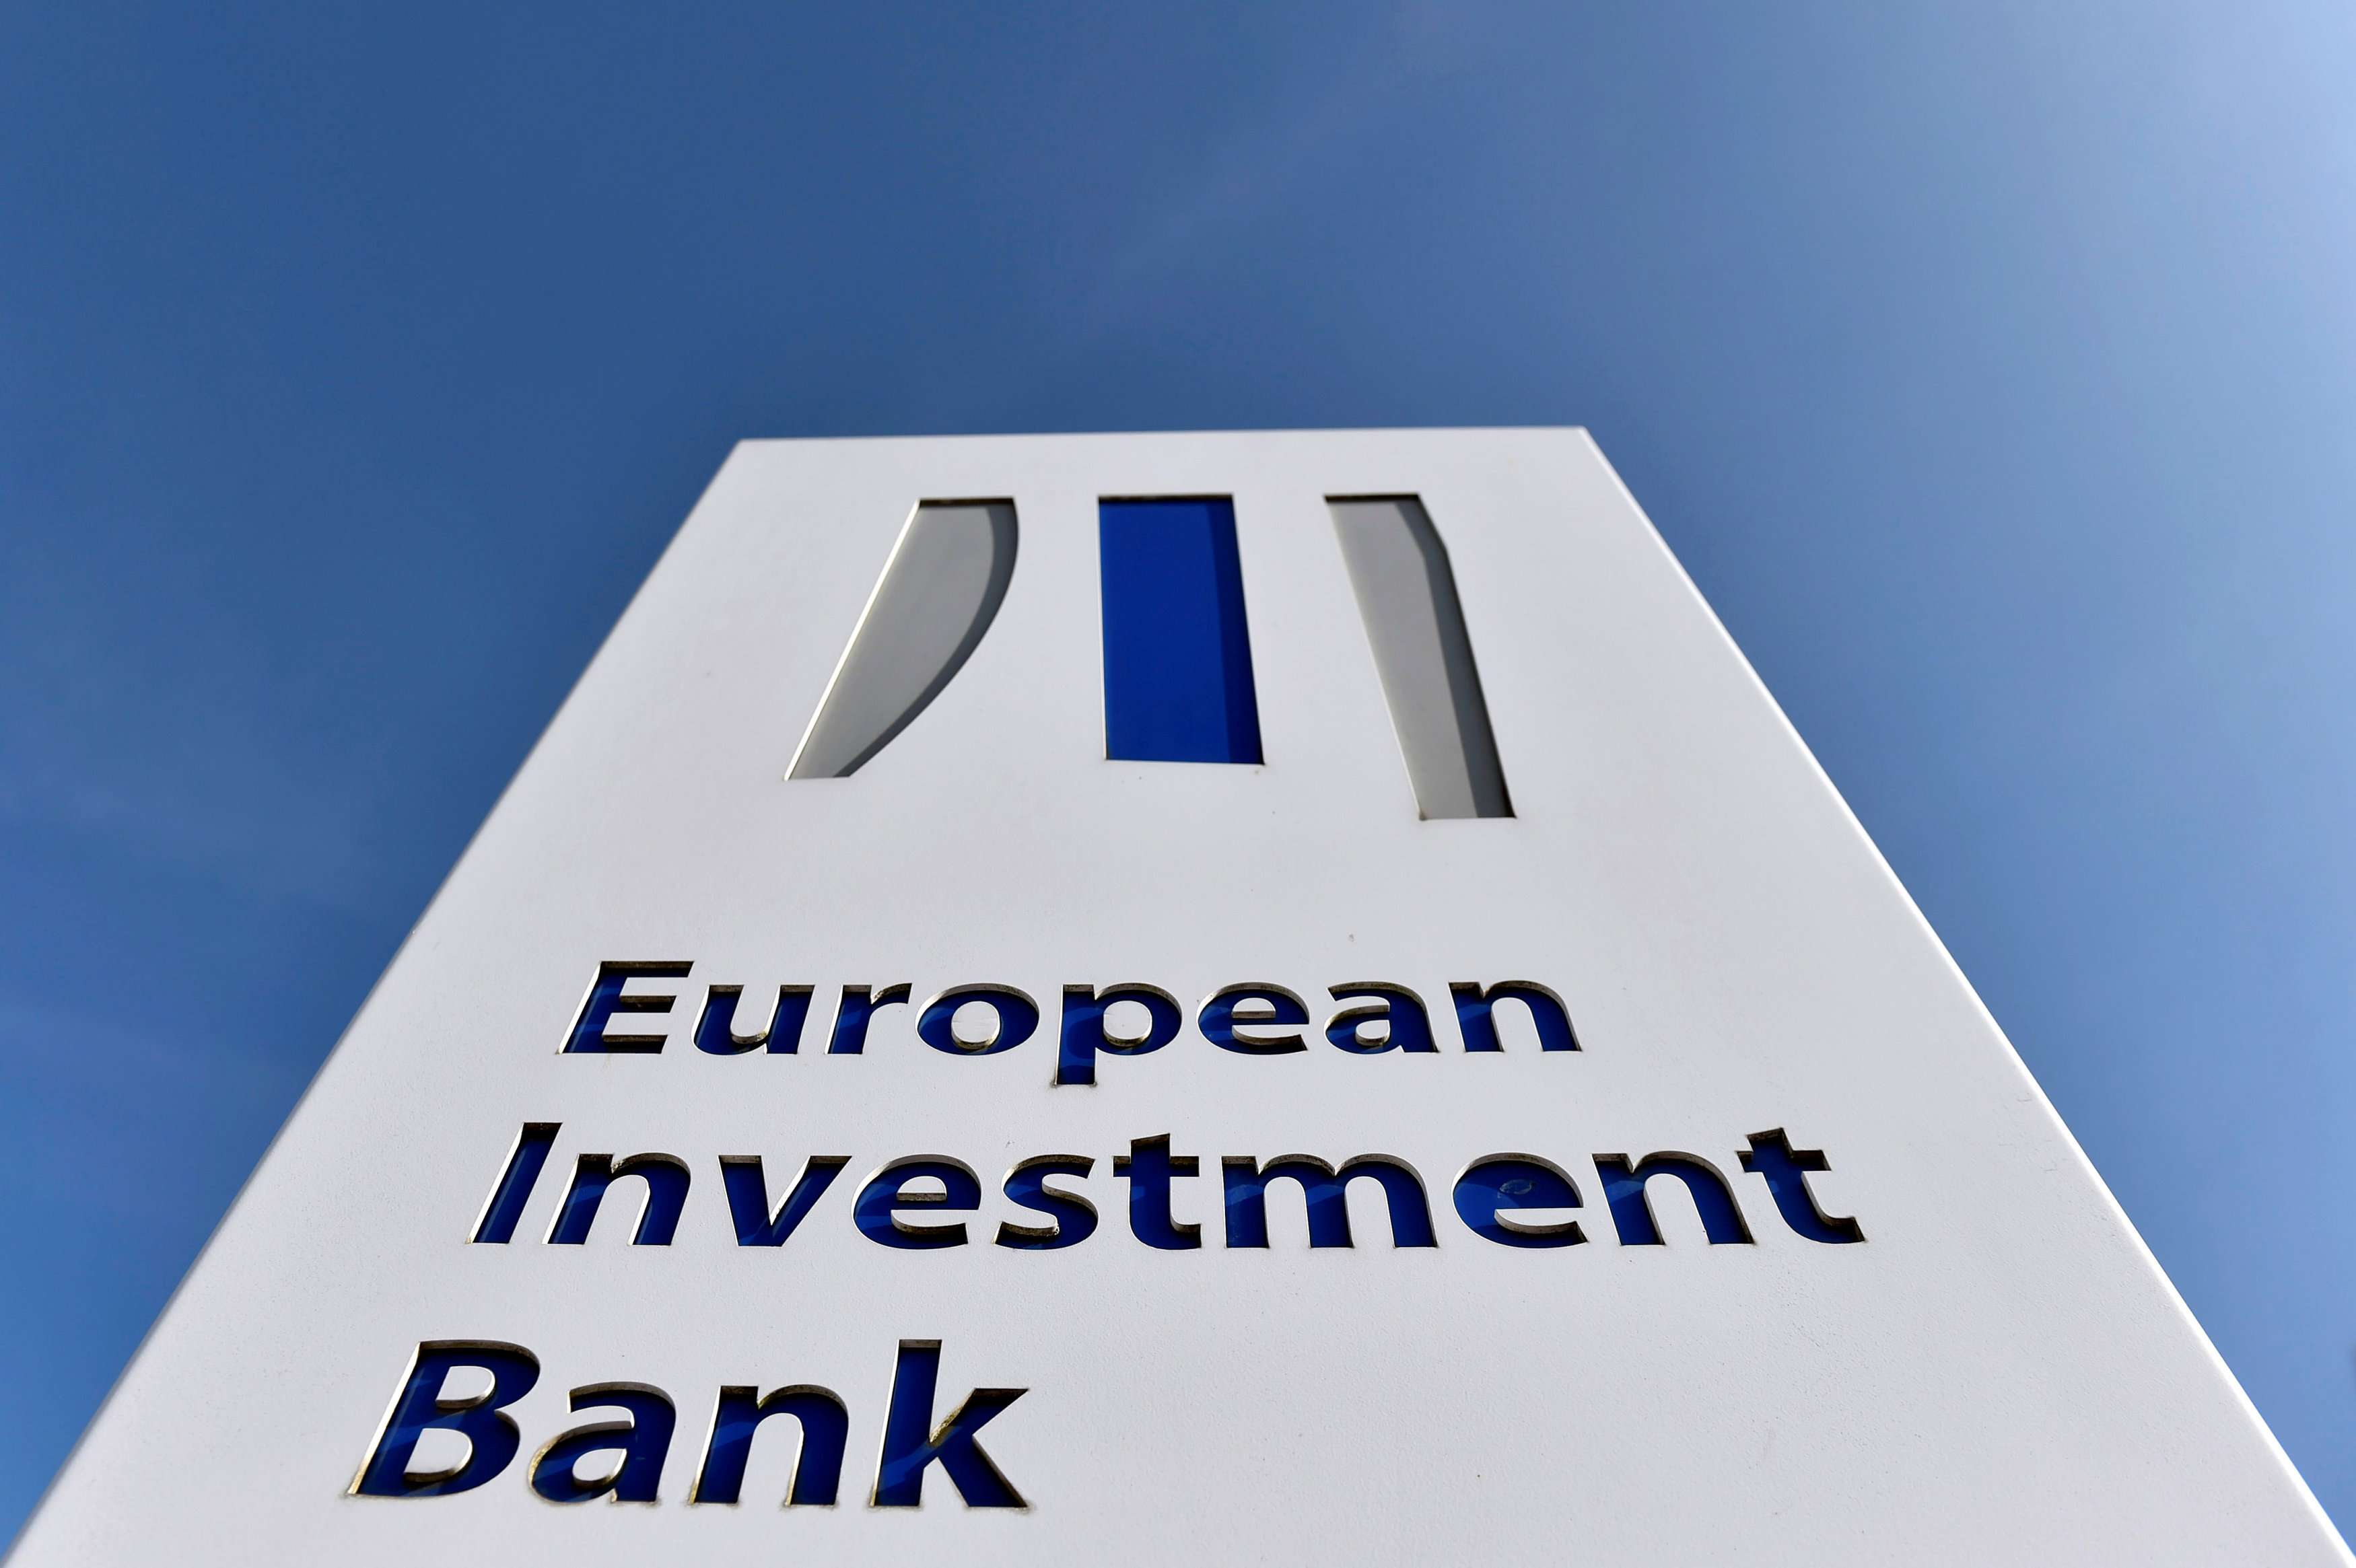 The logo of the European Investment Bank is pictured in the city of Luxembourg